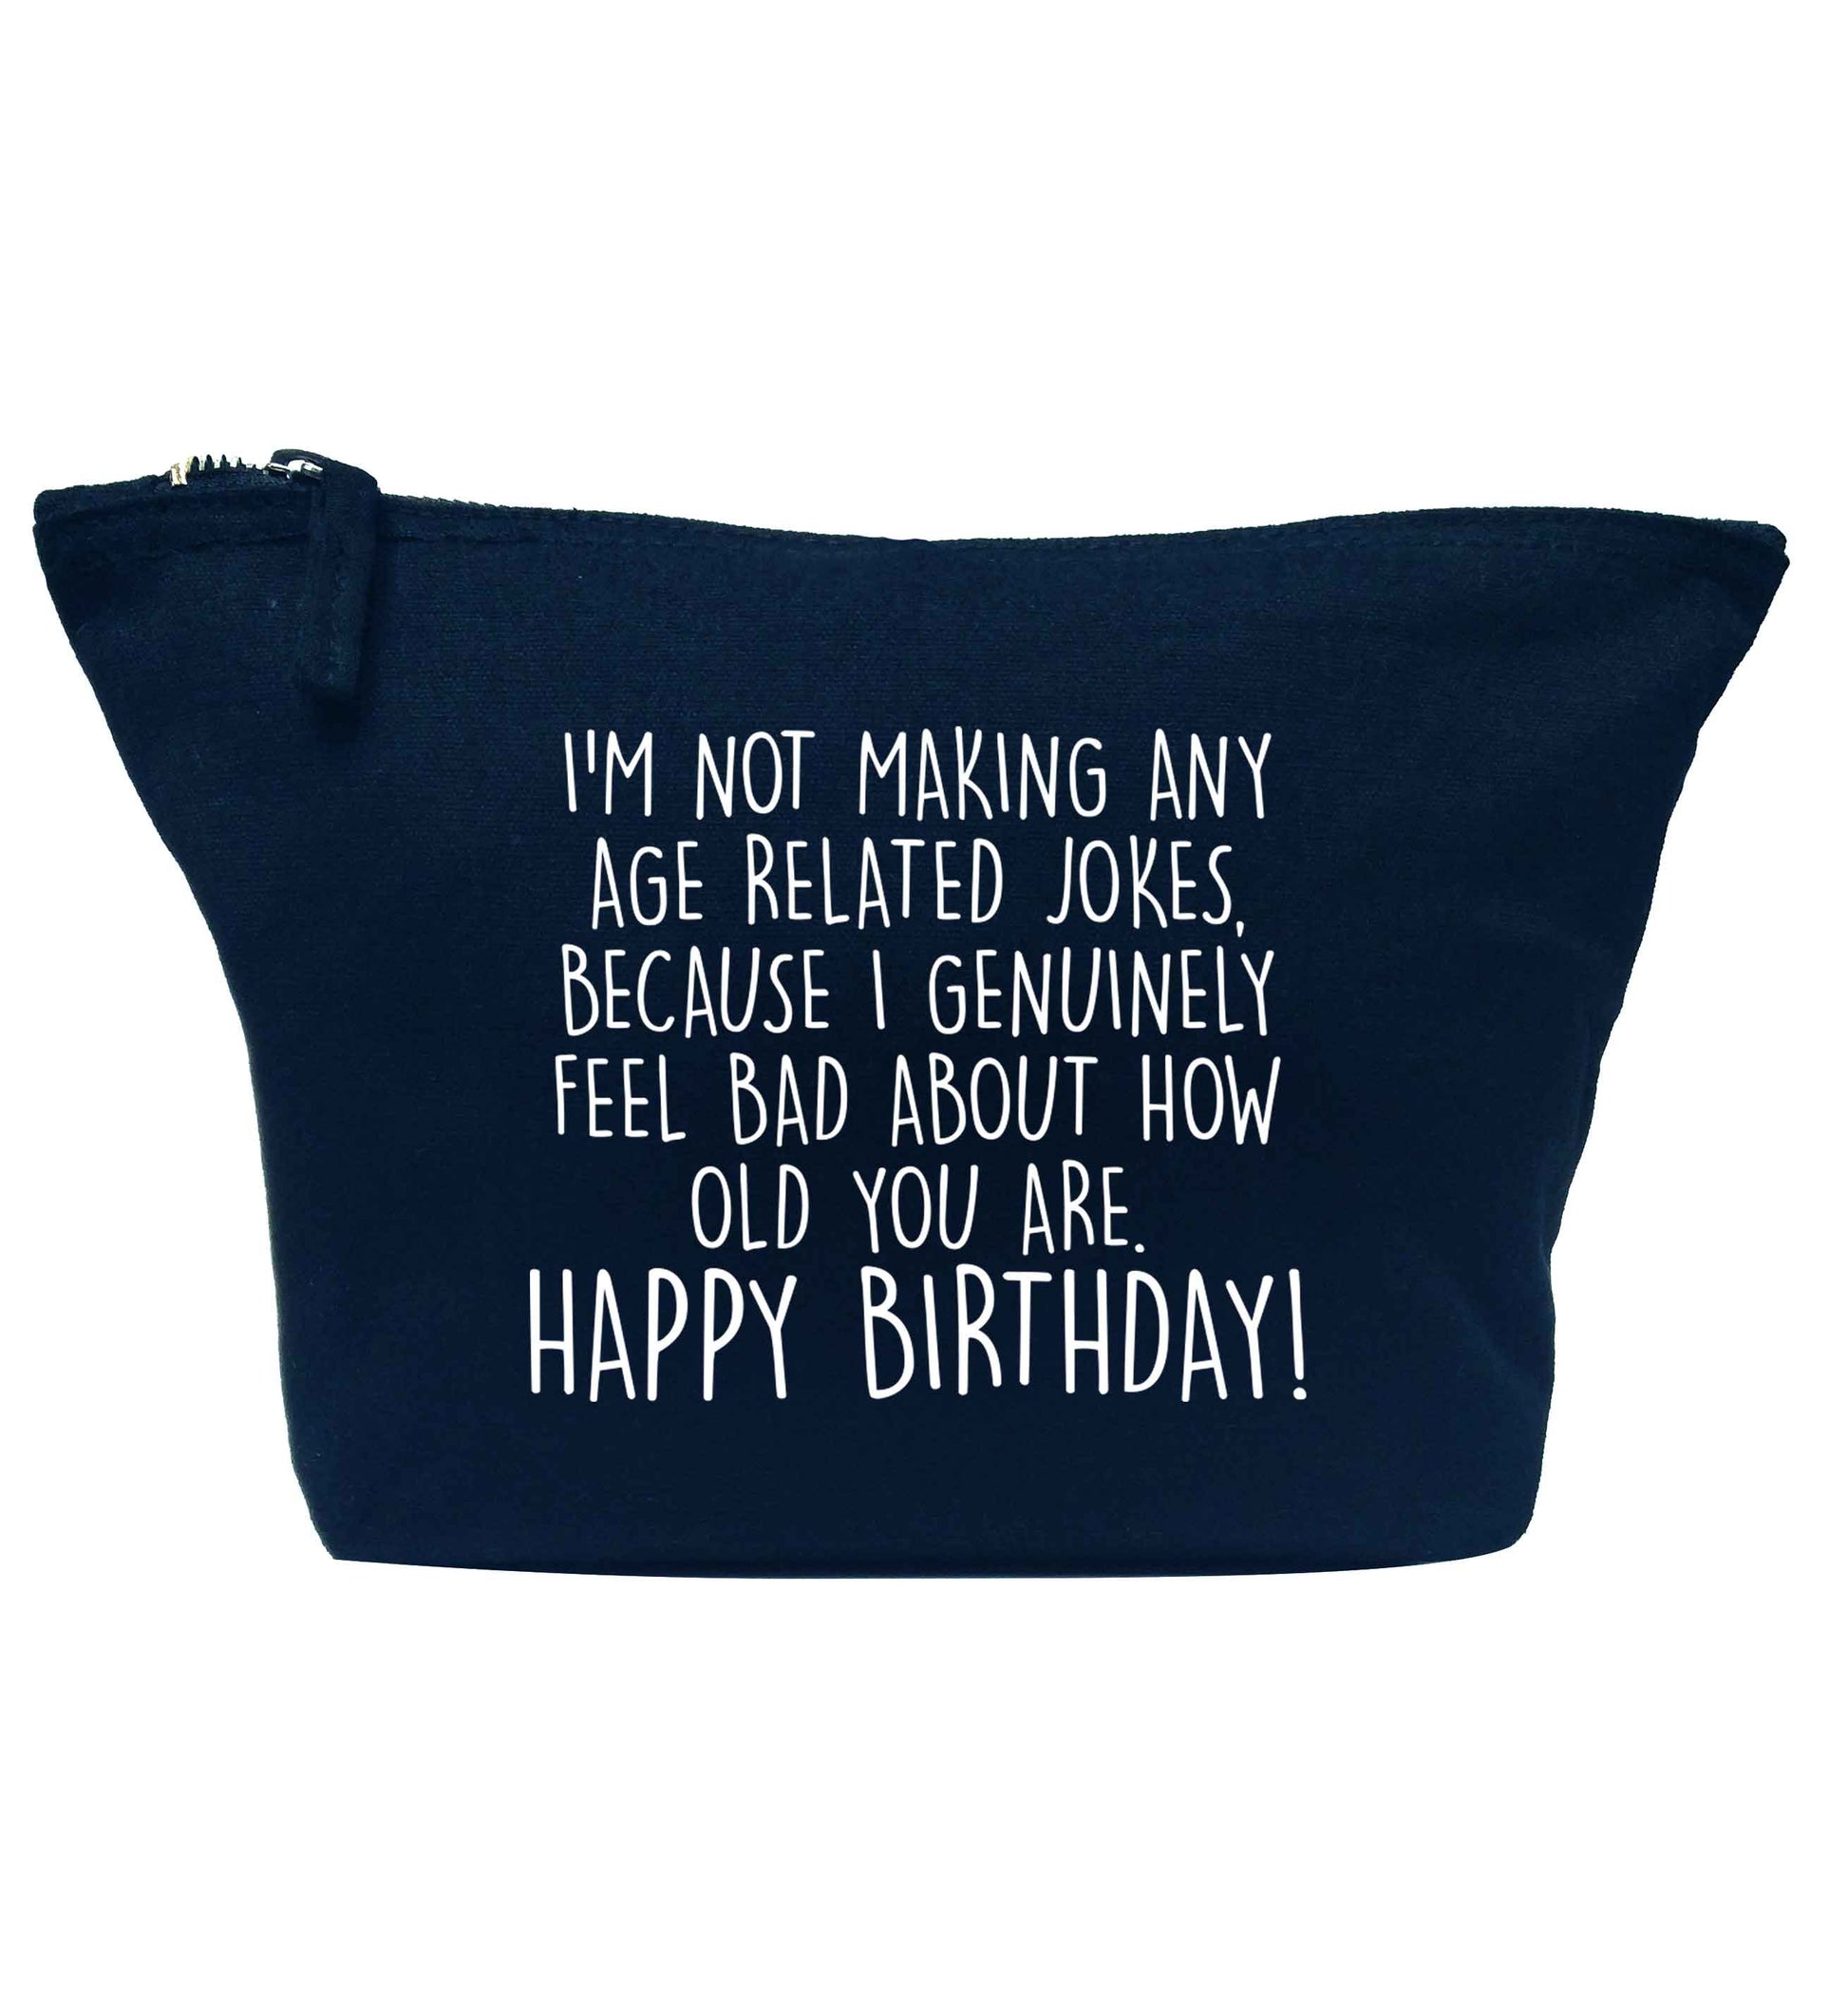 I'm not making any age related jokes because I genuinely feel bad for how old you are navy makeup bag